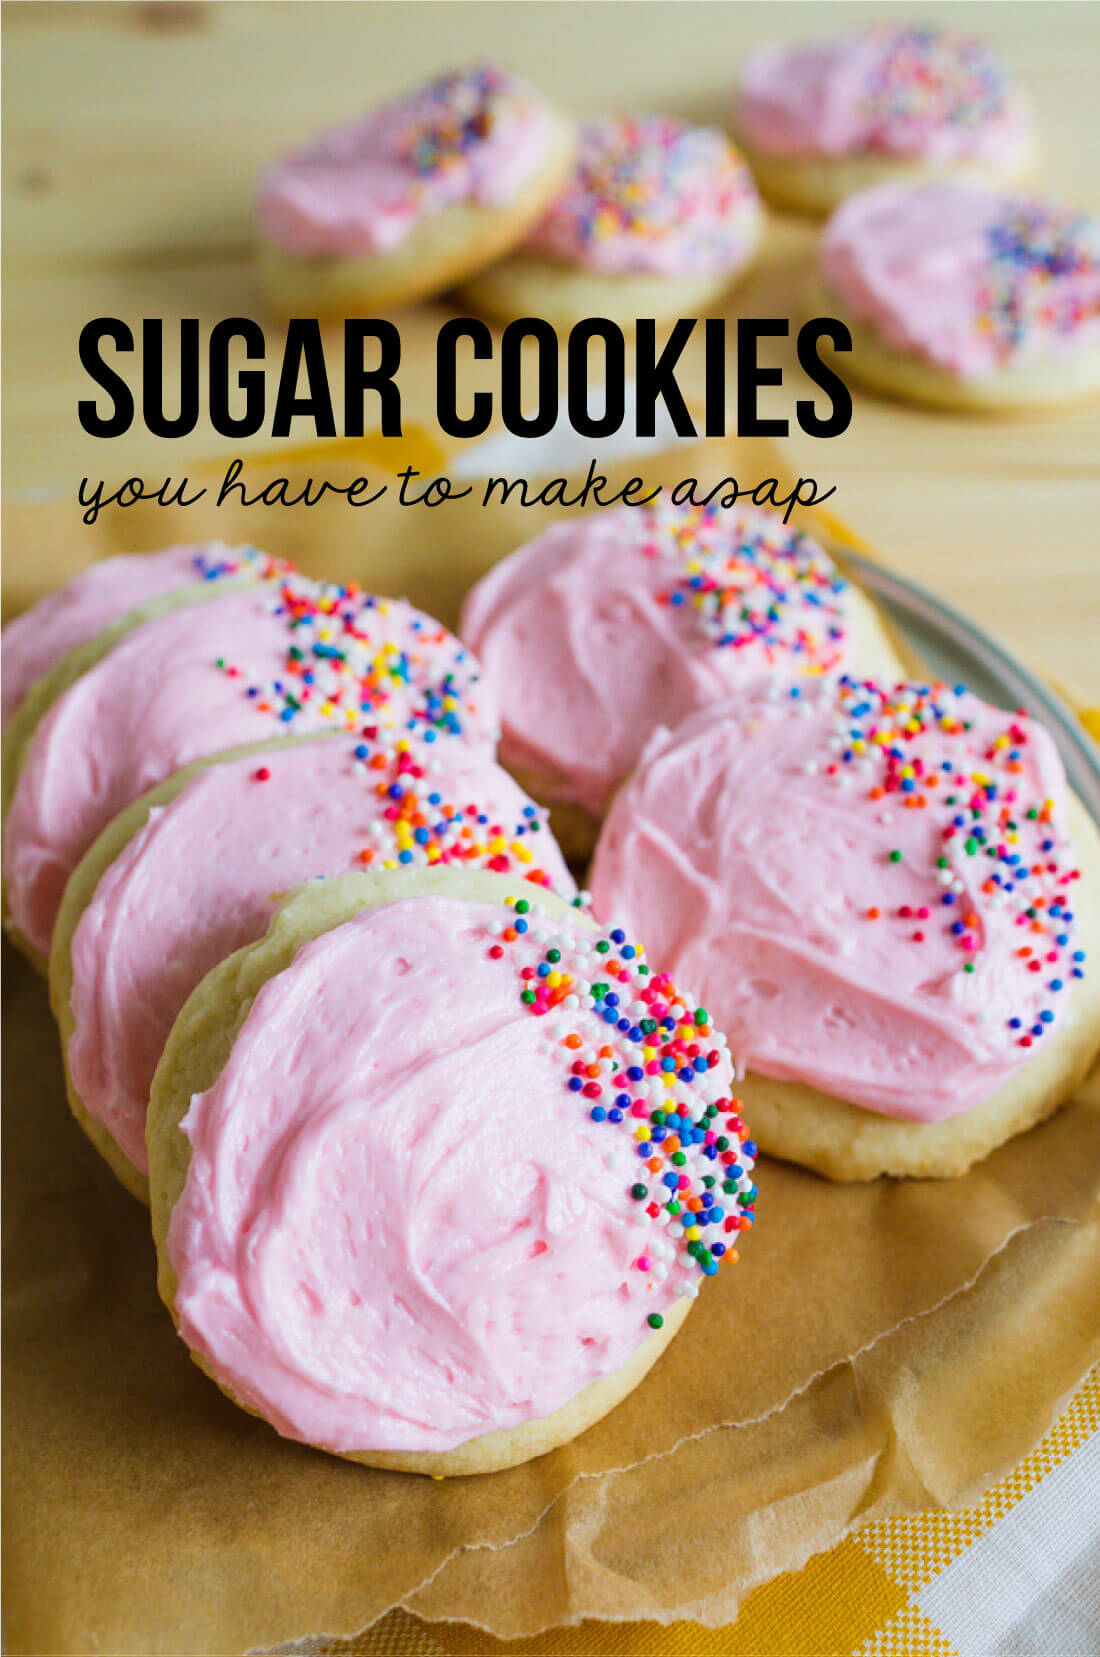 Sugar Cookies - a recipe that you have to try asap! from www.thirtyhandmadedays.com